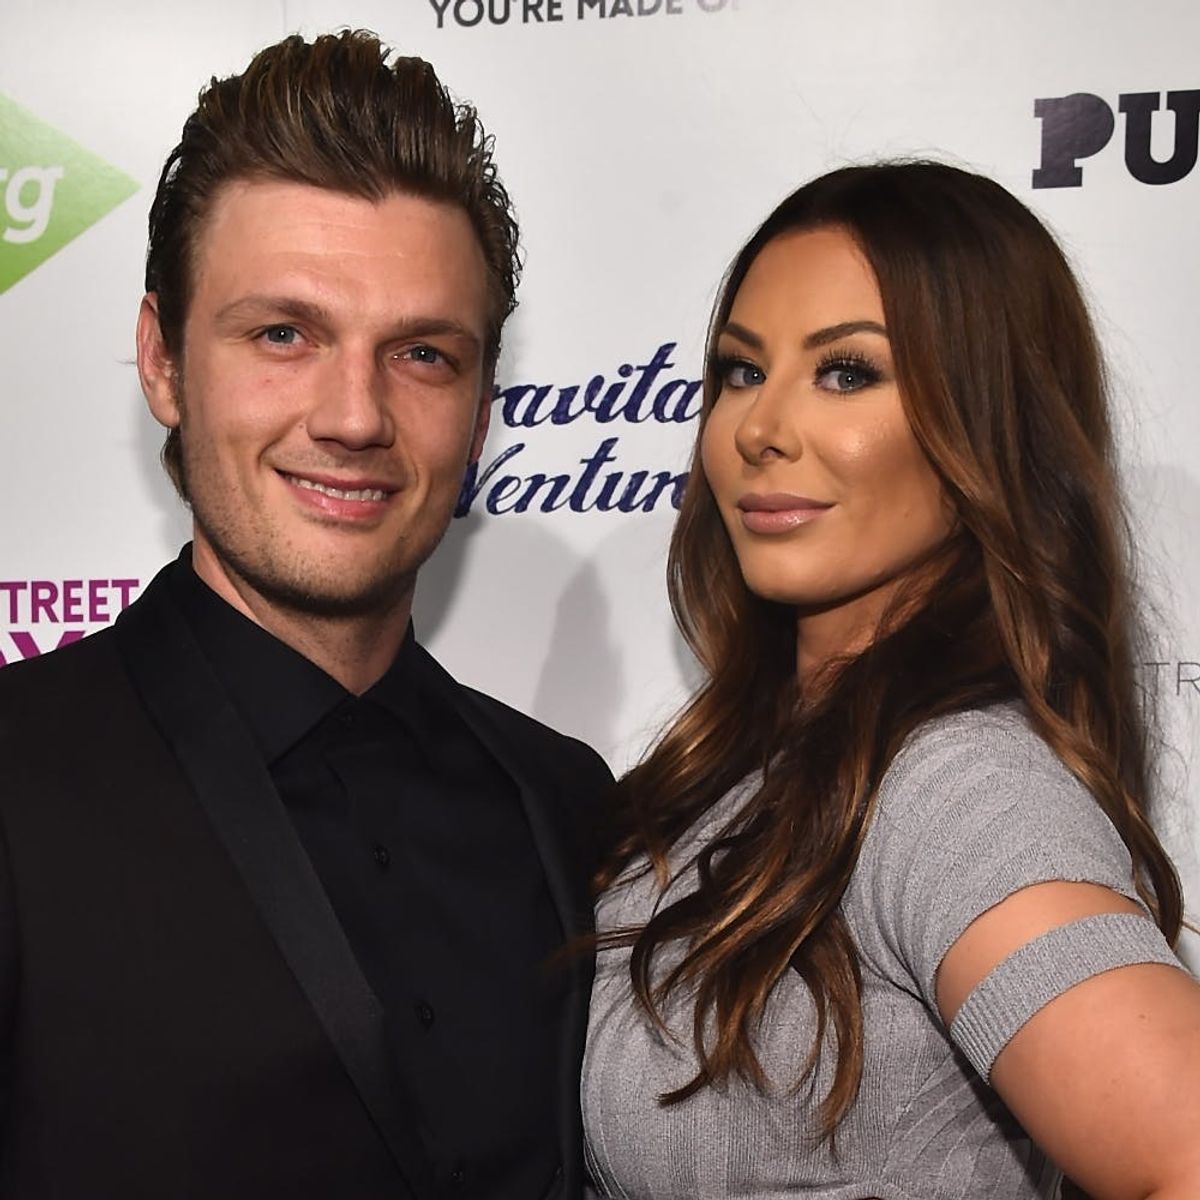 Find Out the Reason Behind the Name Nick Carter and His Wife Have Picked for Their First Child